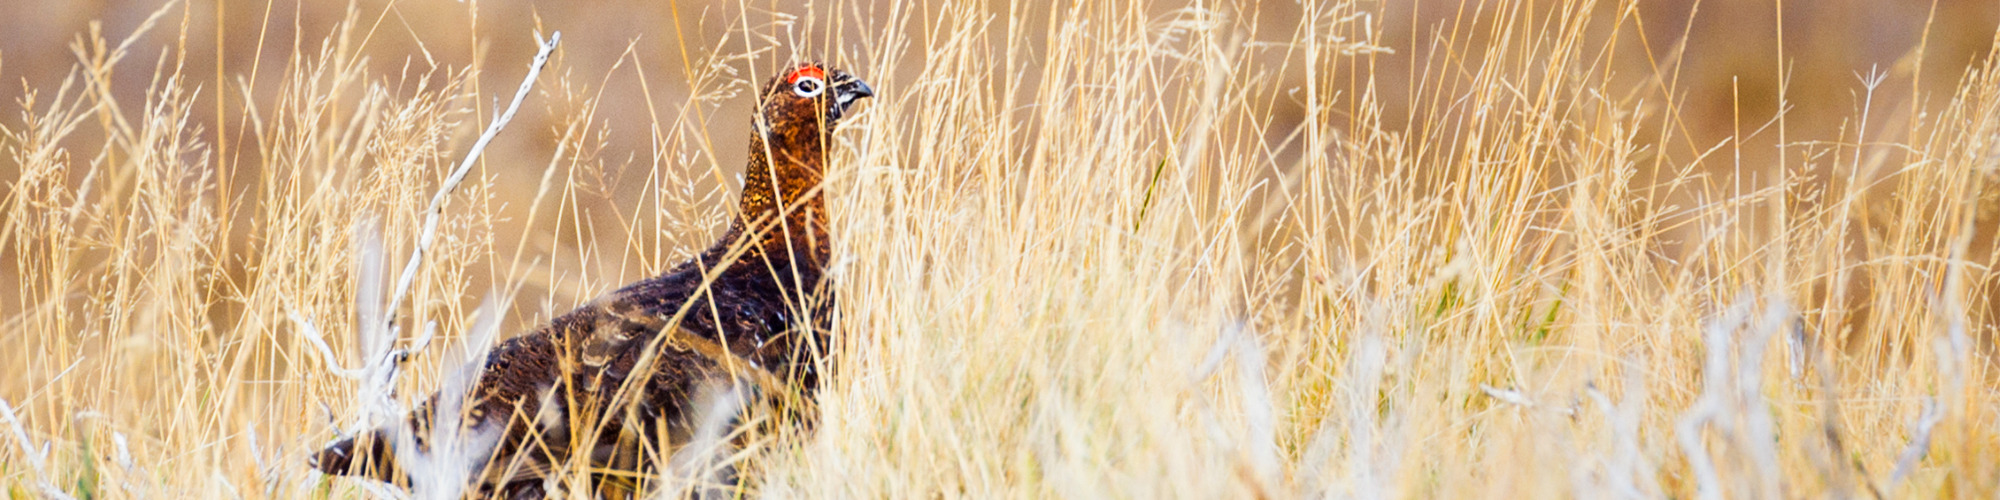 The Land Reform & Wildlife Management (Grouse) Bills - What to Expect in Scotland